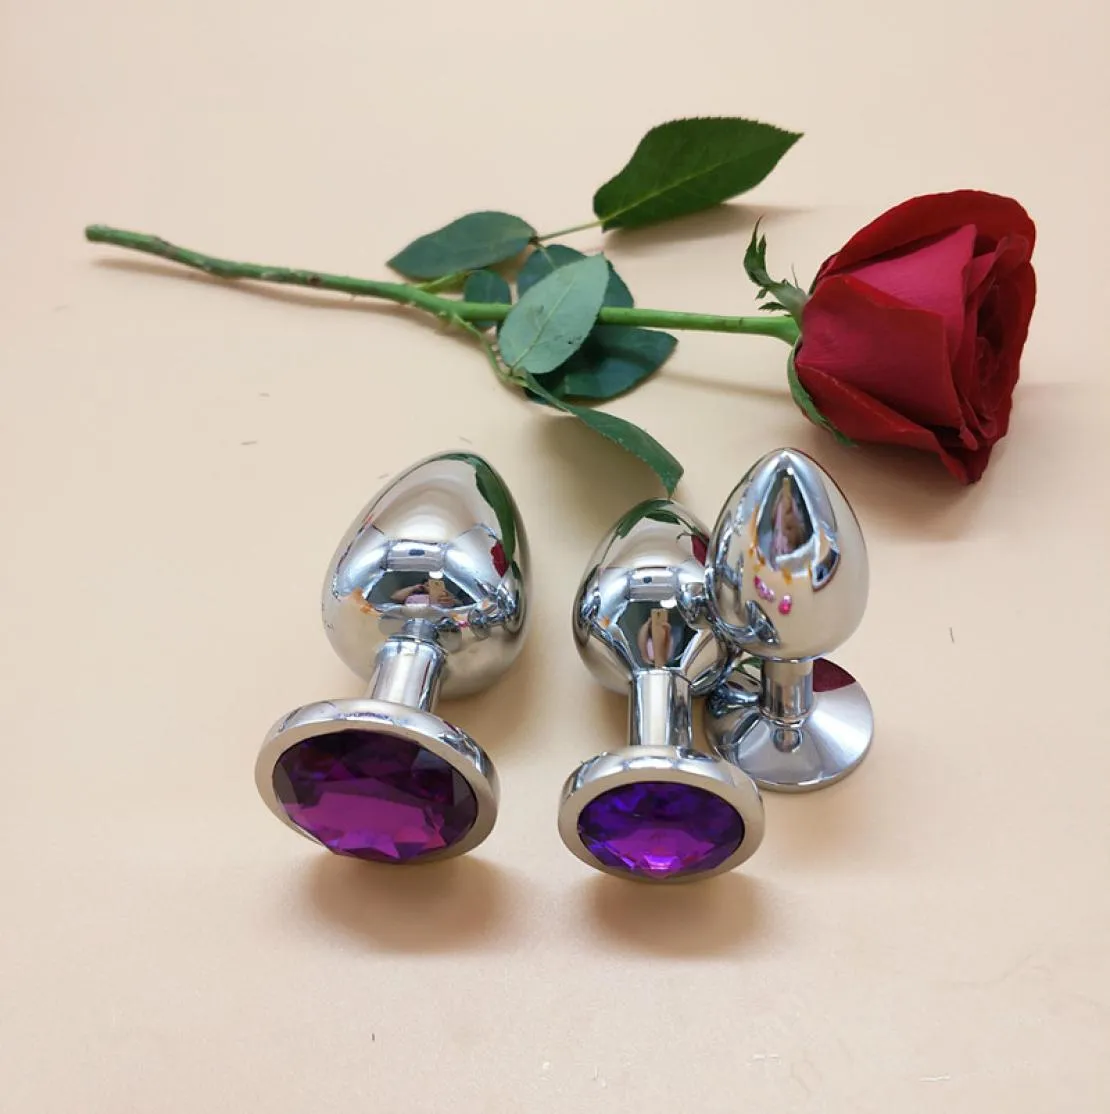 3 sizes Stainless Steel Attractive Butt Plug Rosebud Anal plugs Jewelry sex toys for couple safe and nontoxic buttplug8806084